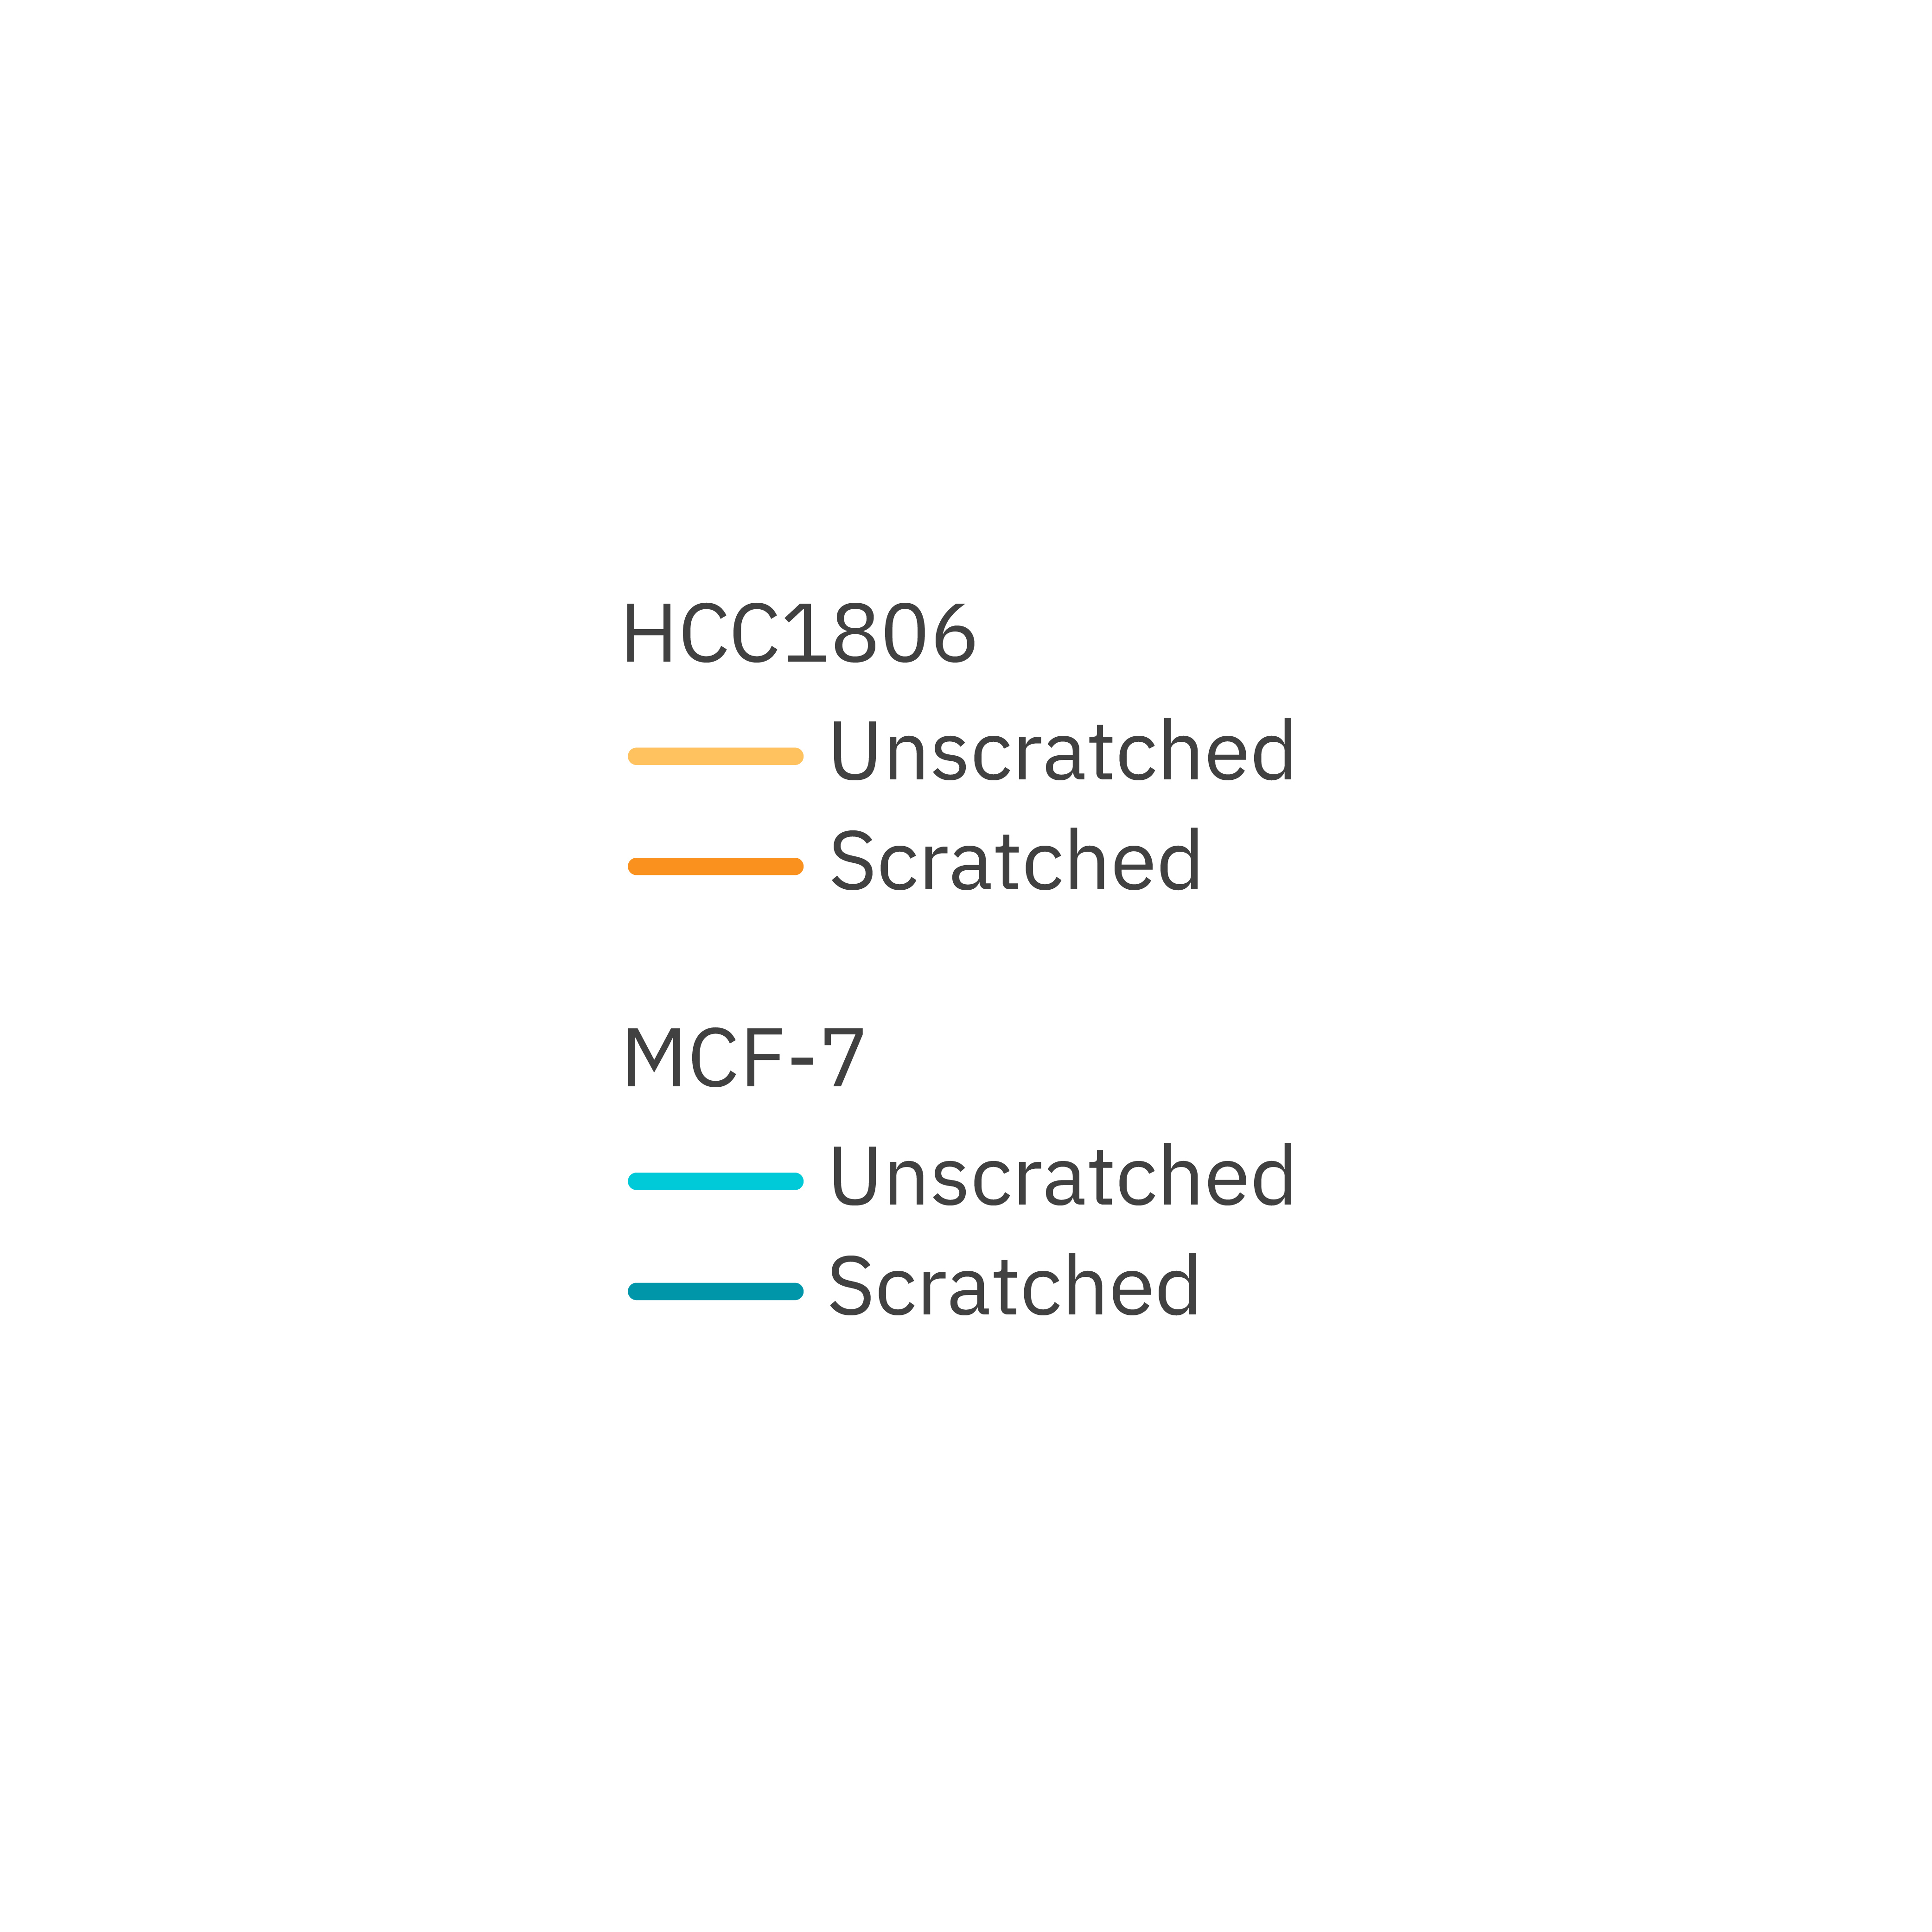 Two breast cancer cell lines were continuously monitored pre- and post-scratch induction; the impedance of HCC1806 cells nearly recovered to unscratched levels, whereas MCF-7 cells normalized impedance remained consistently low. 